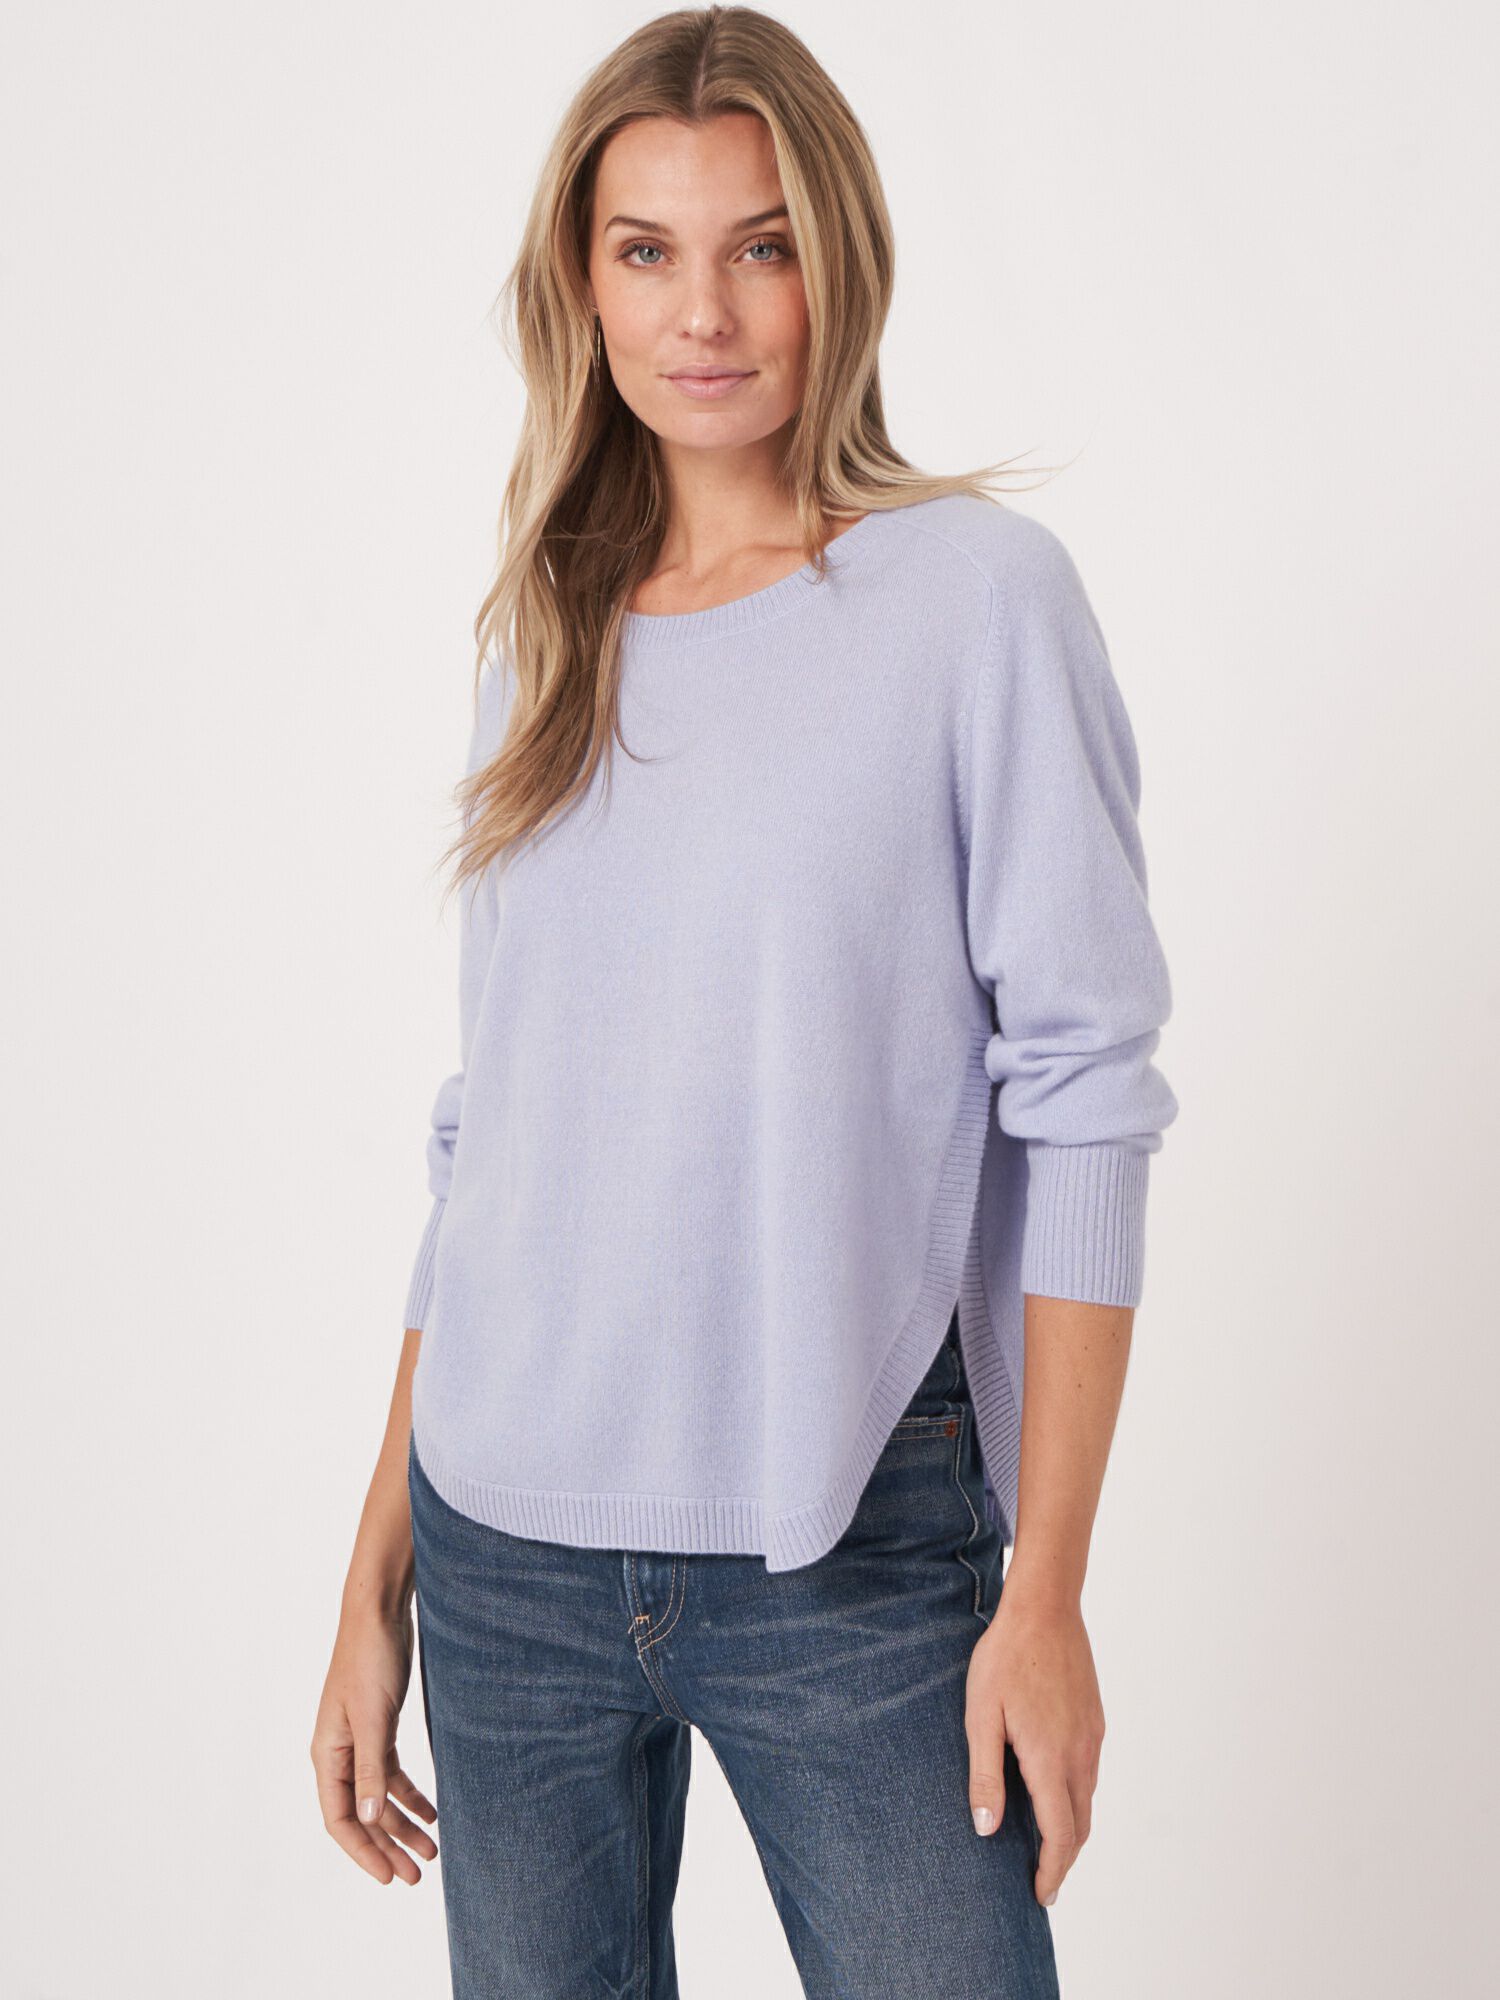 REPEAT cashmere Cashmere boothalstrui met ronde zoom